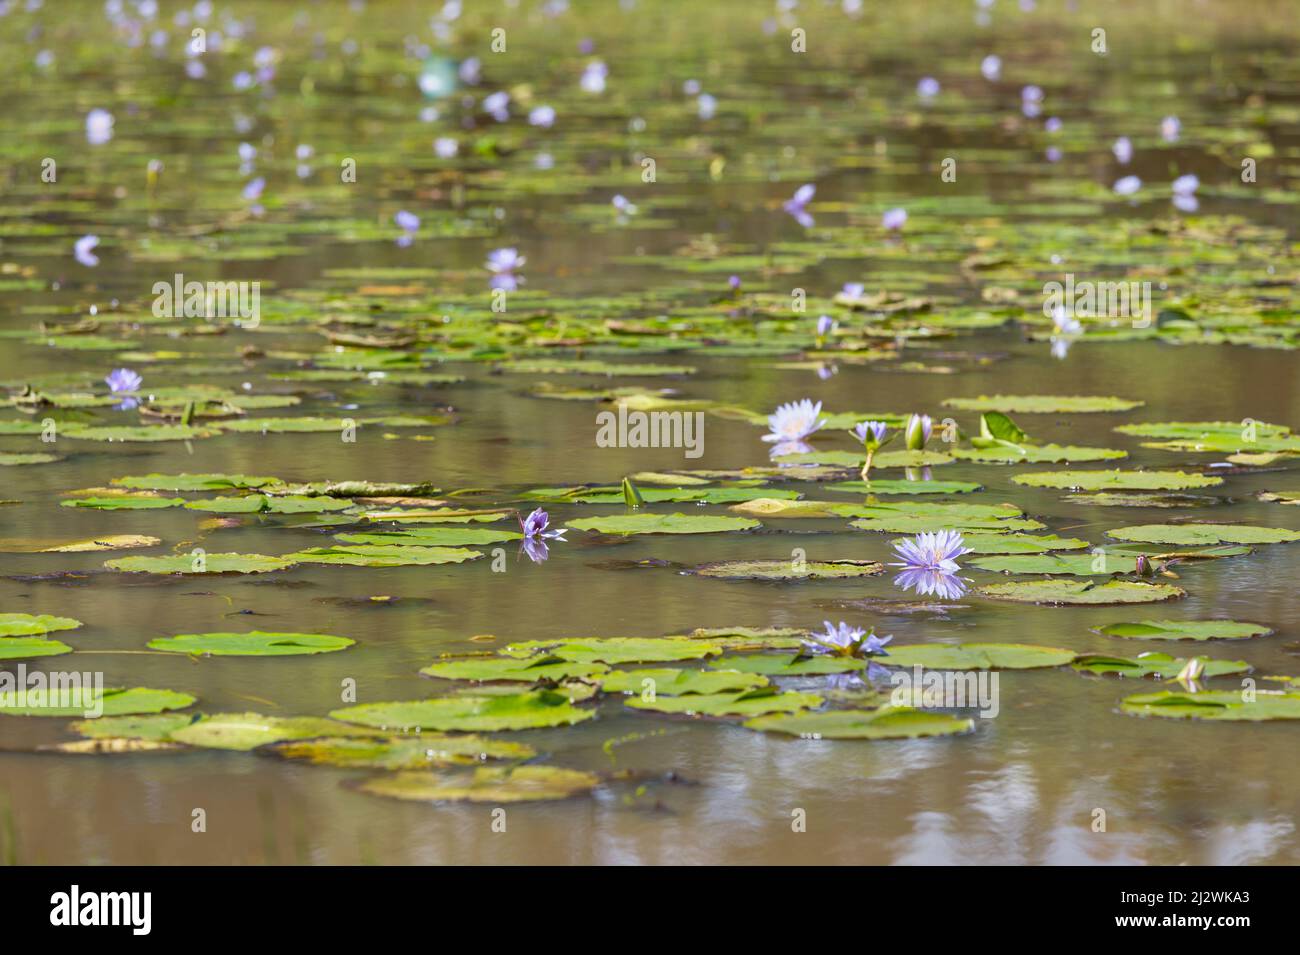 Hundreds of beautiful water lilies in a lake in Karura Forest, Nairobi, Kenya with selective focus. Stock Photo